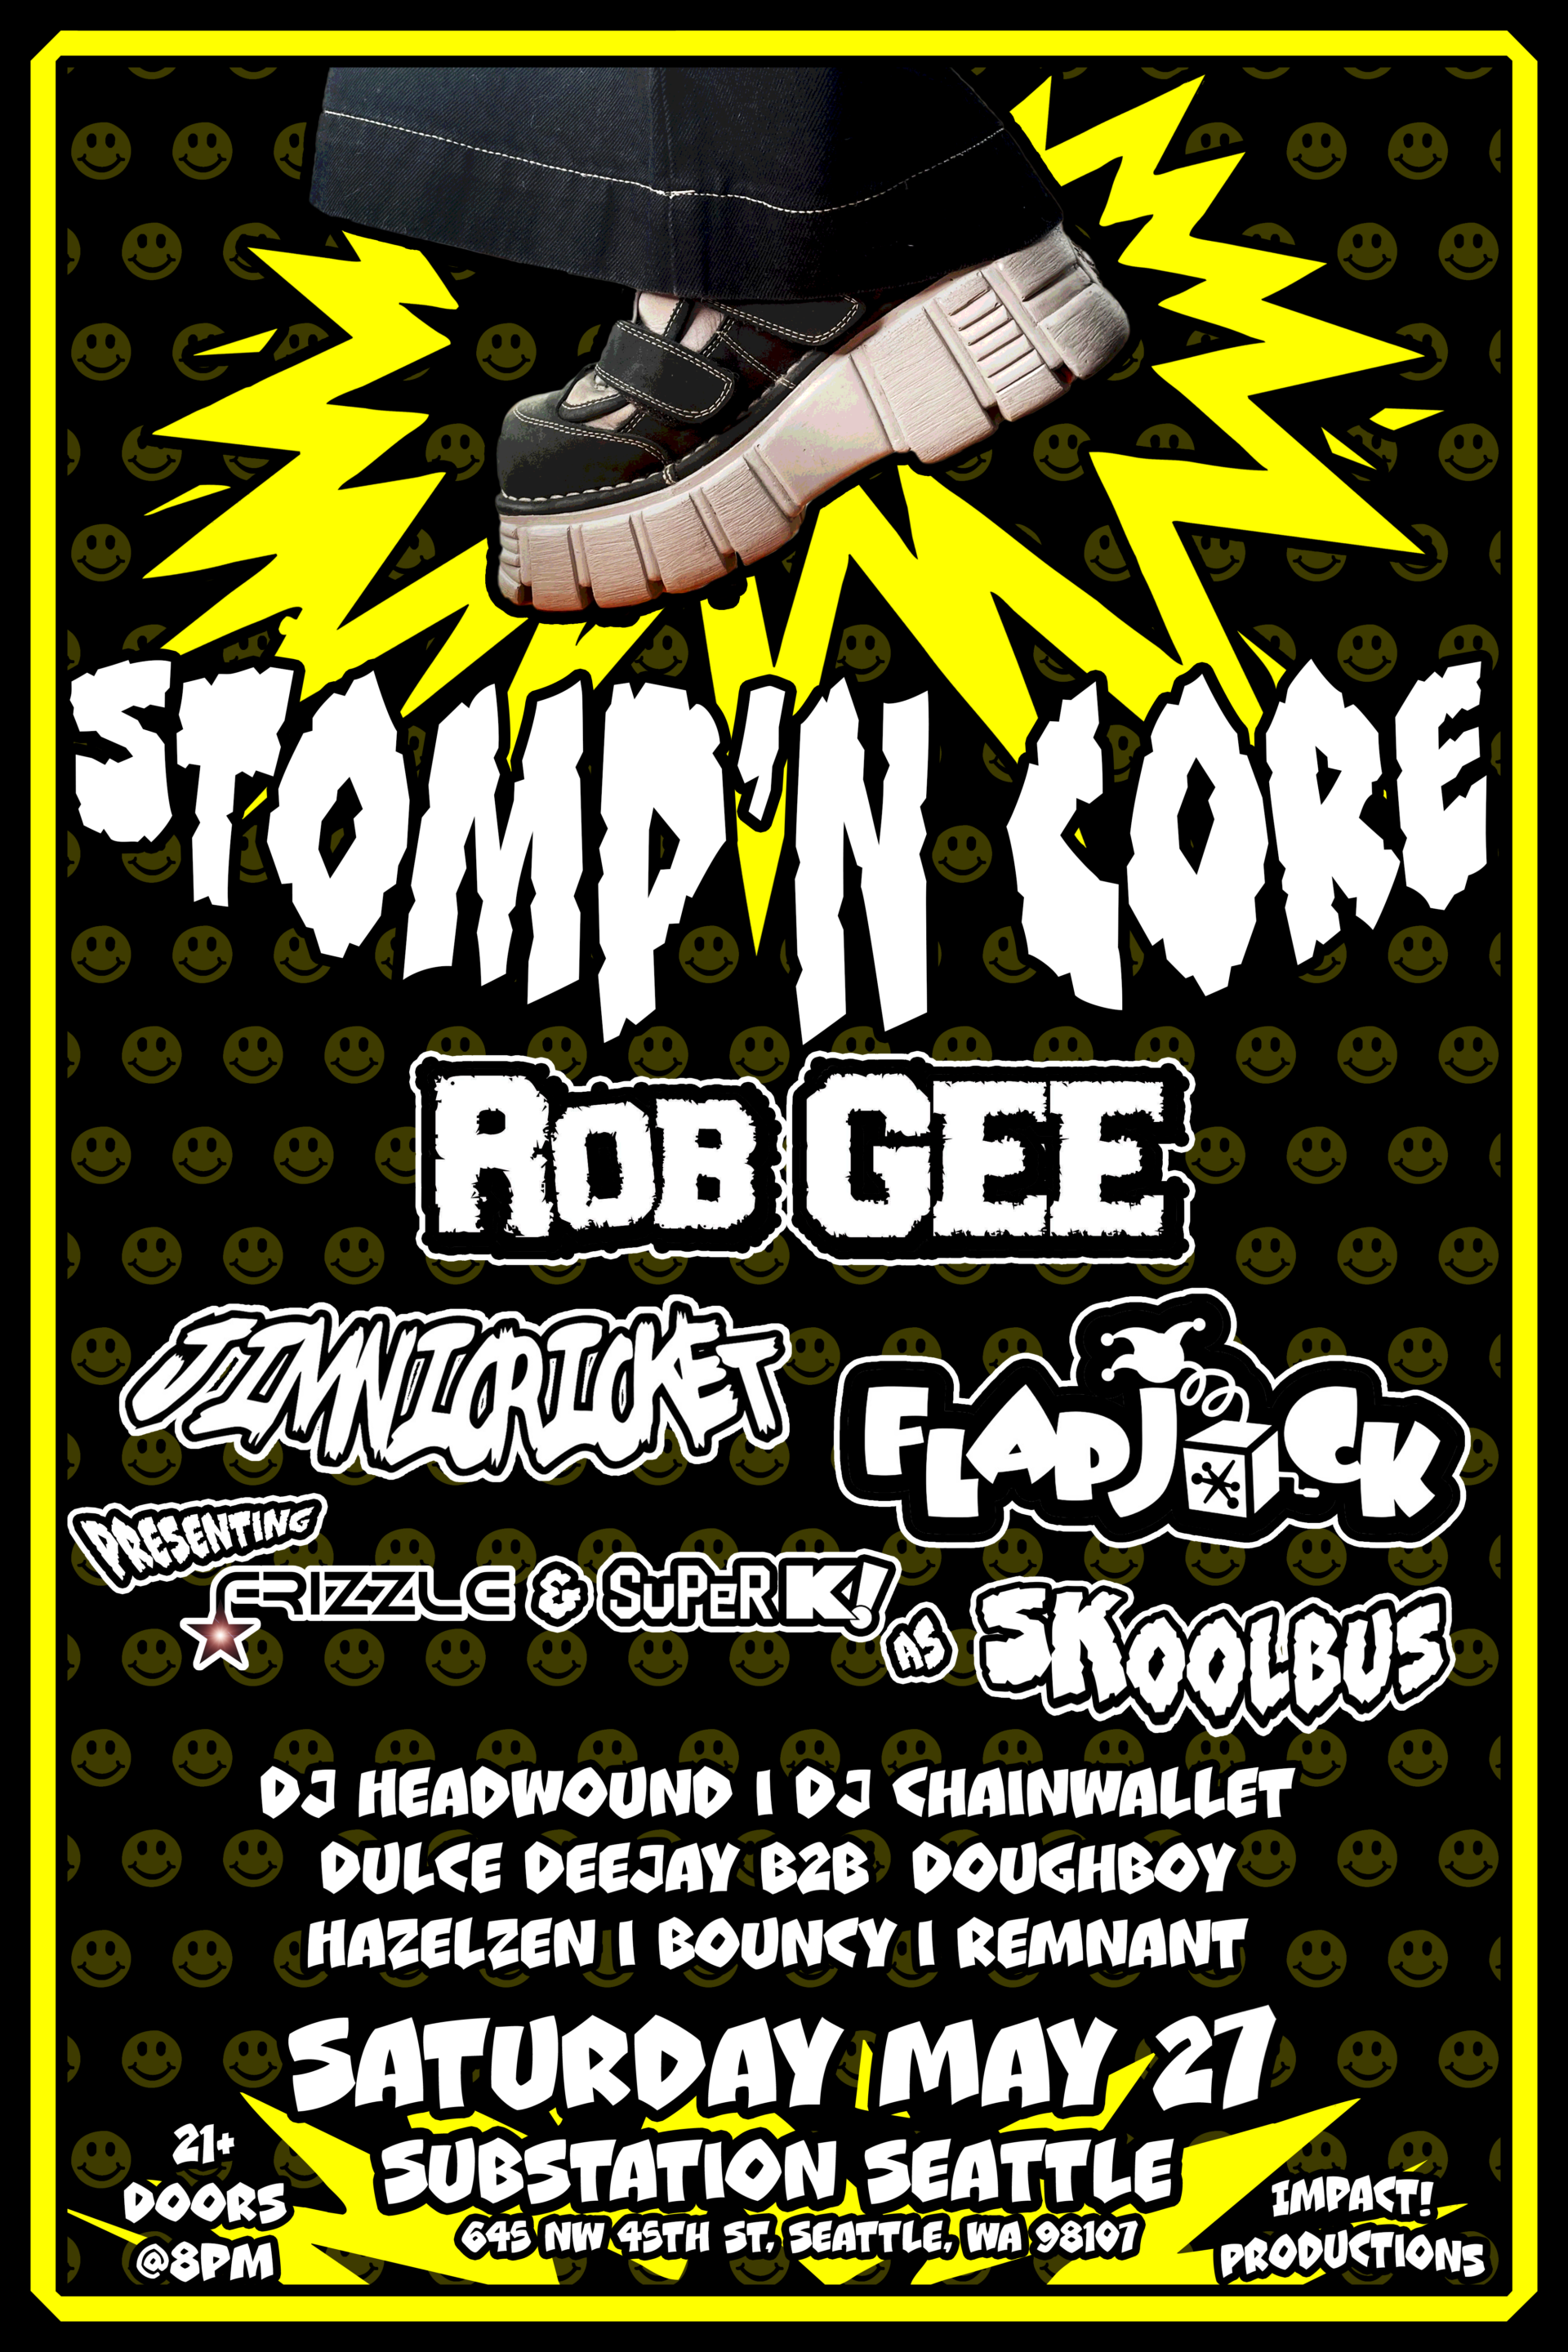 STOMP'N CORE FLYER POSTER